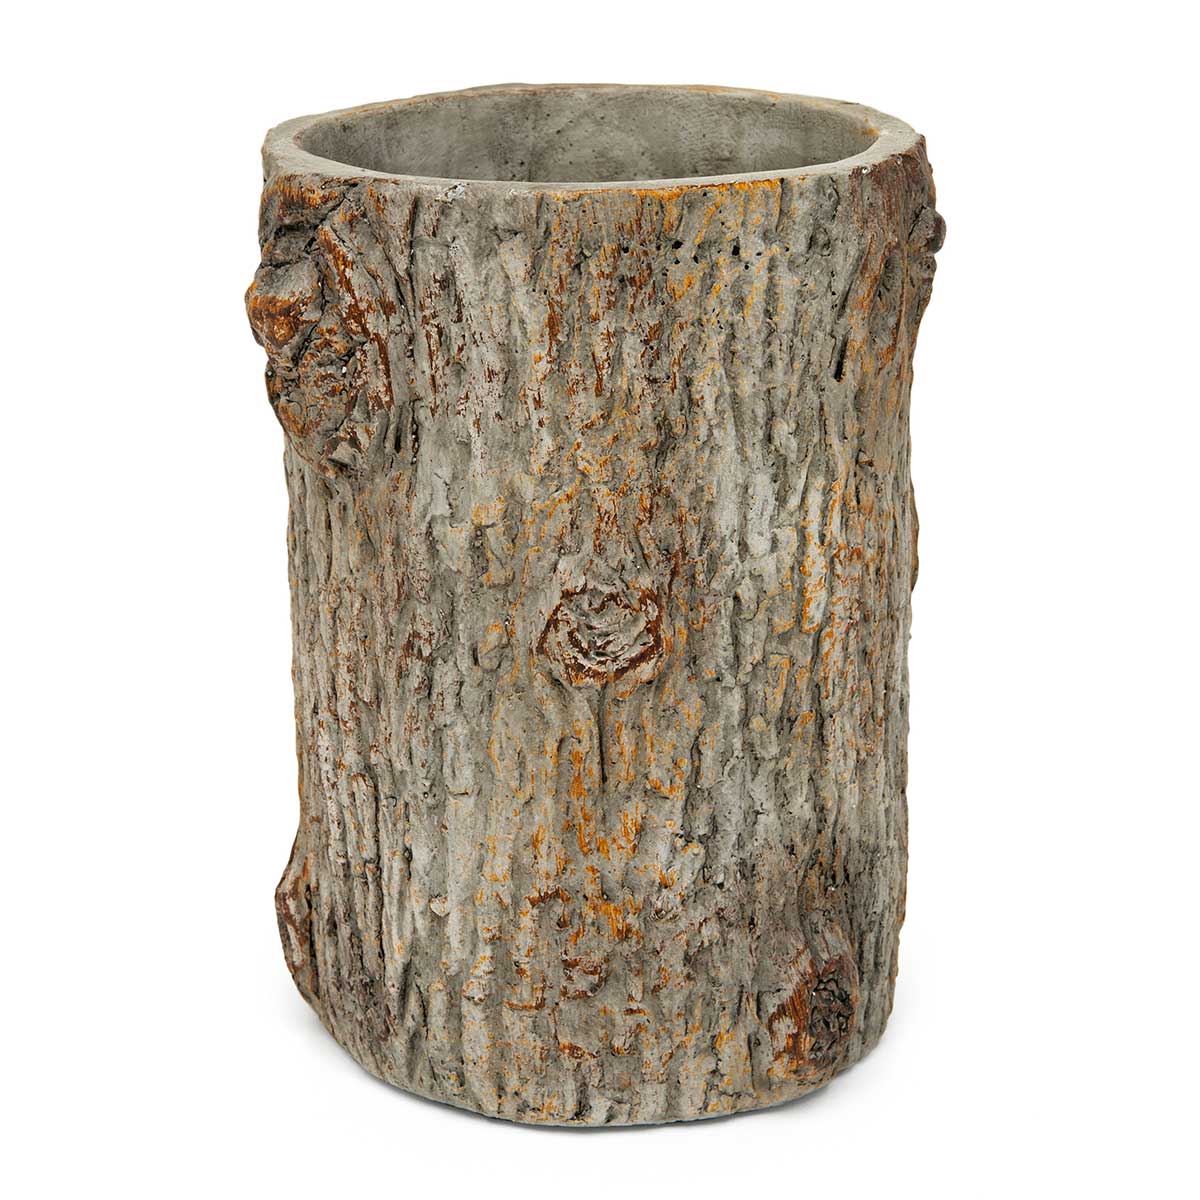 POT TREE TRUNK TALL 5IN X 7IN BROWN CONCRETE